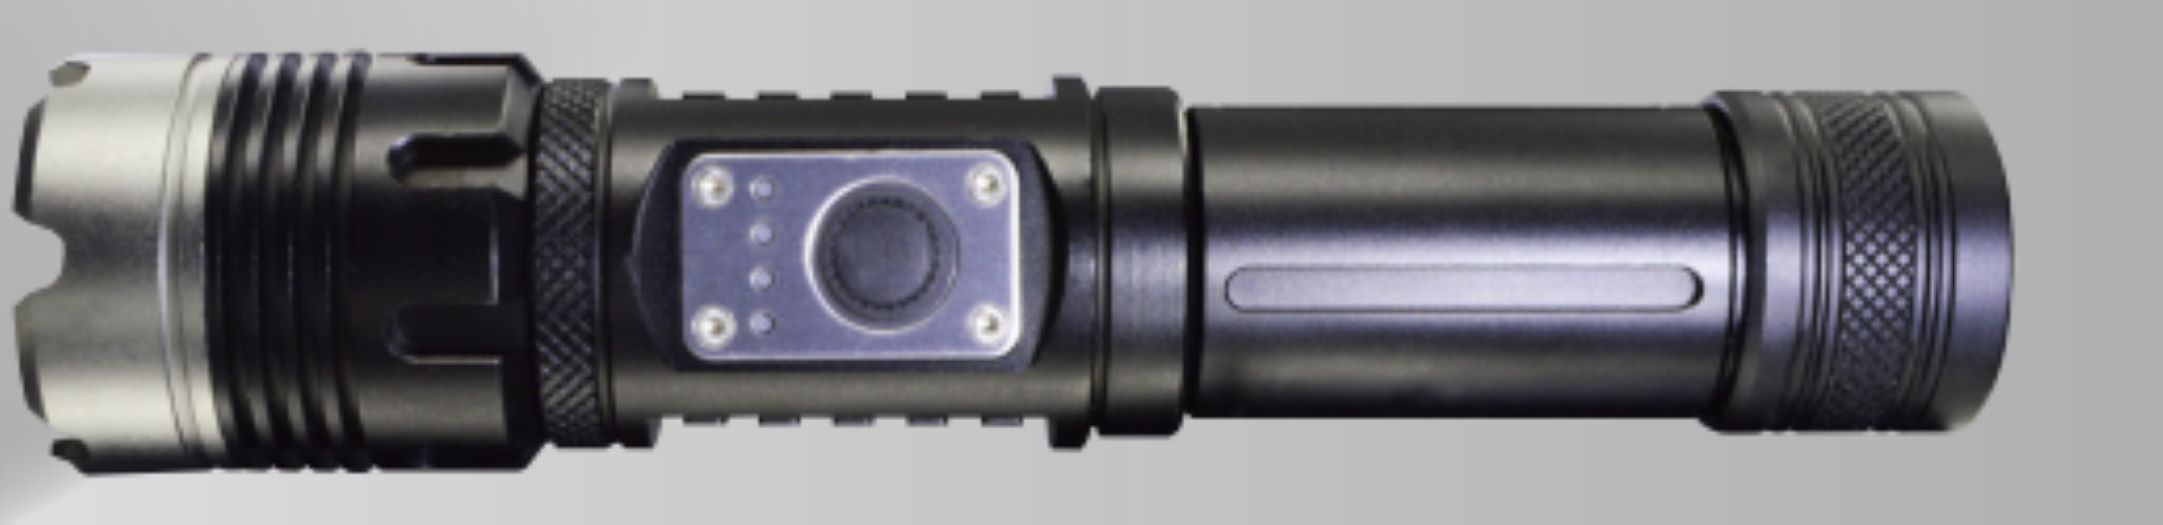 Sensible Products HRF-2 High-Beam Rechargeable Flashlight-2, Black